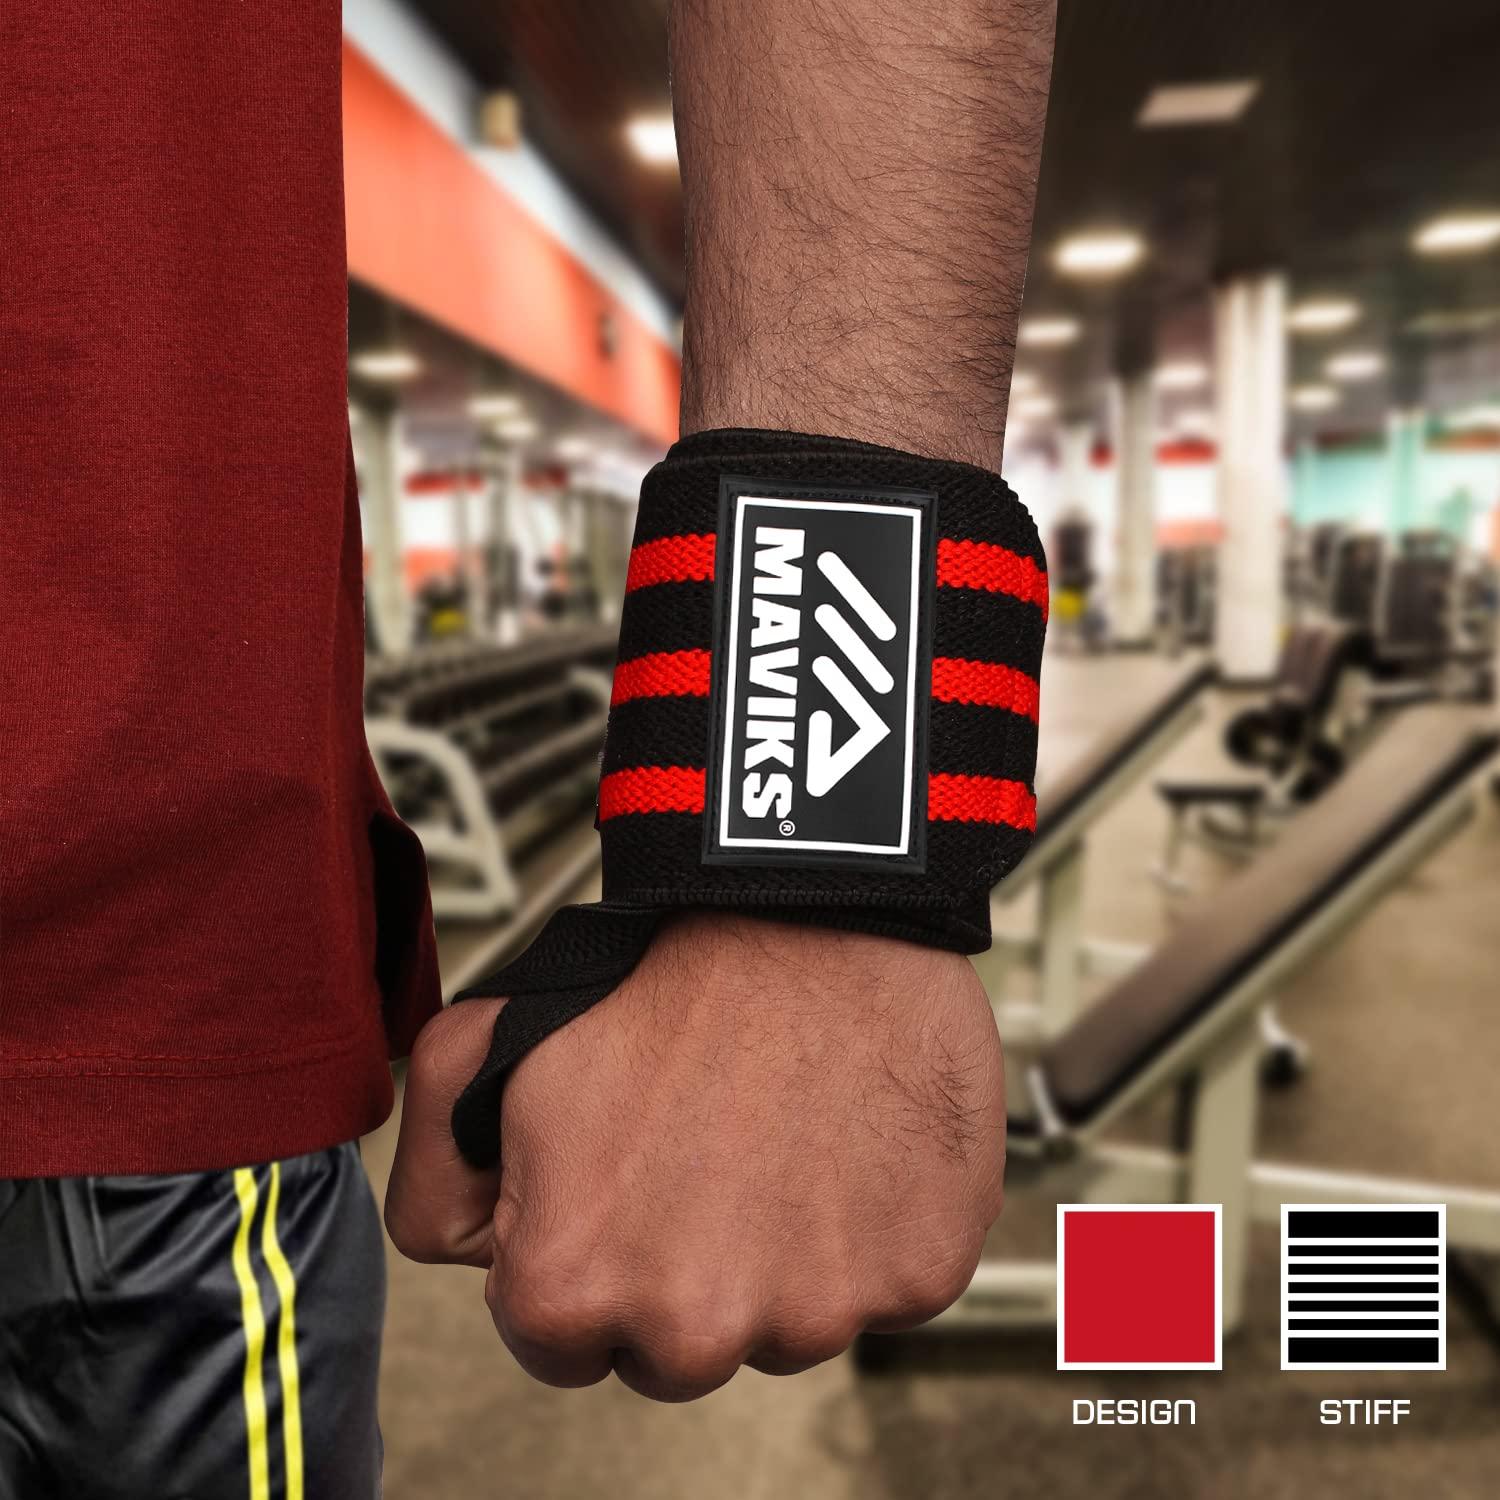 What are the drawbacks of using wristwraps while weight lifting